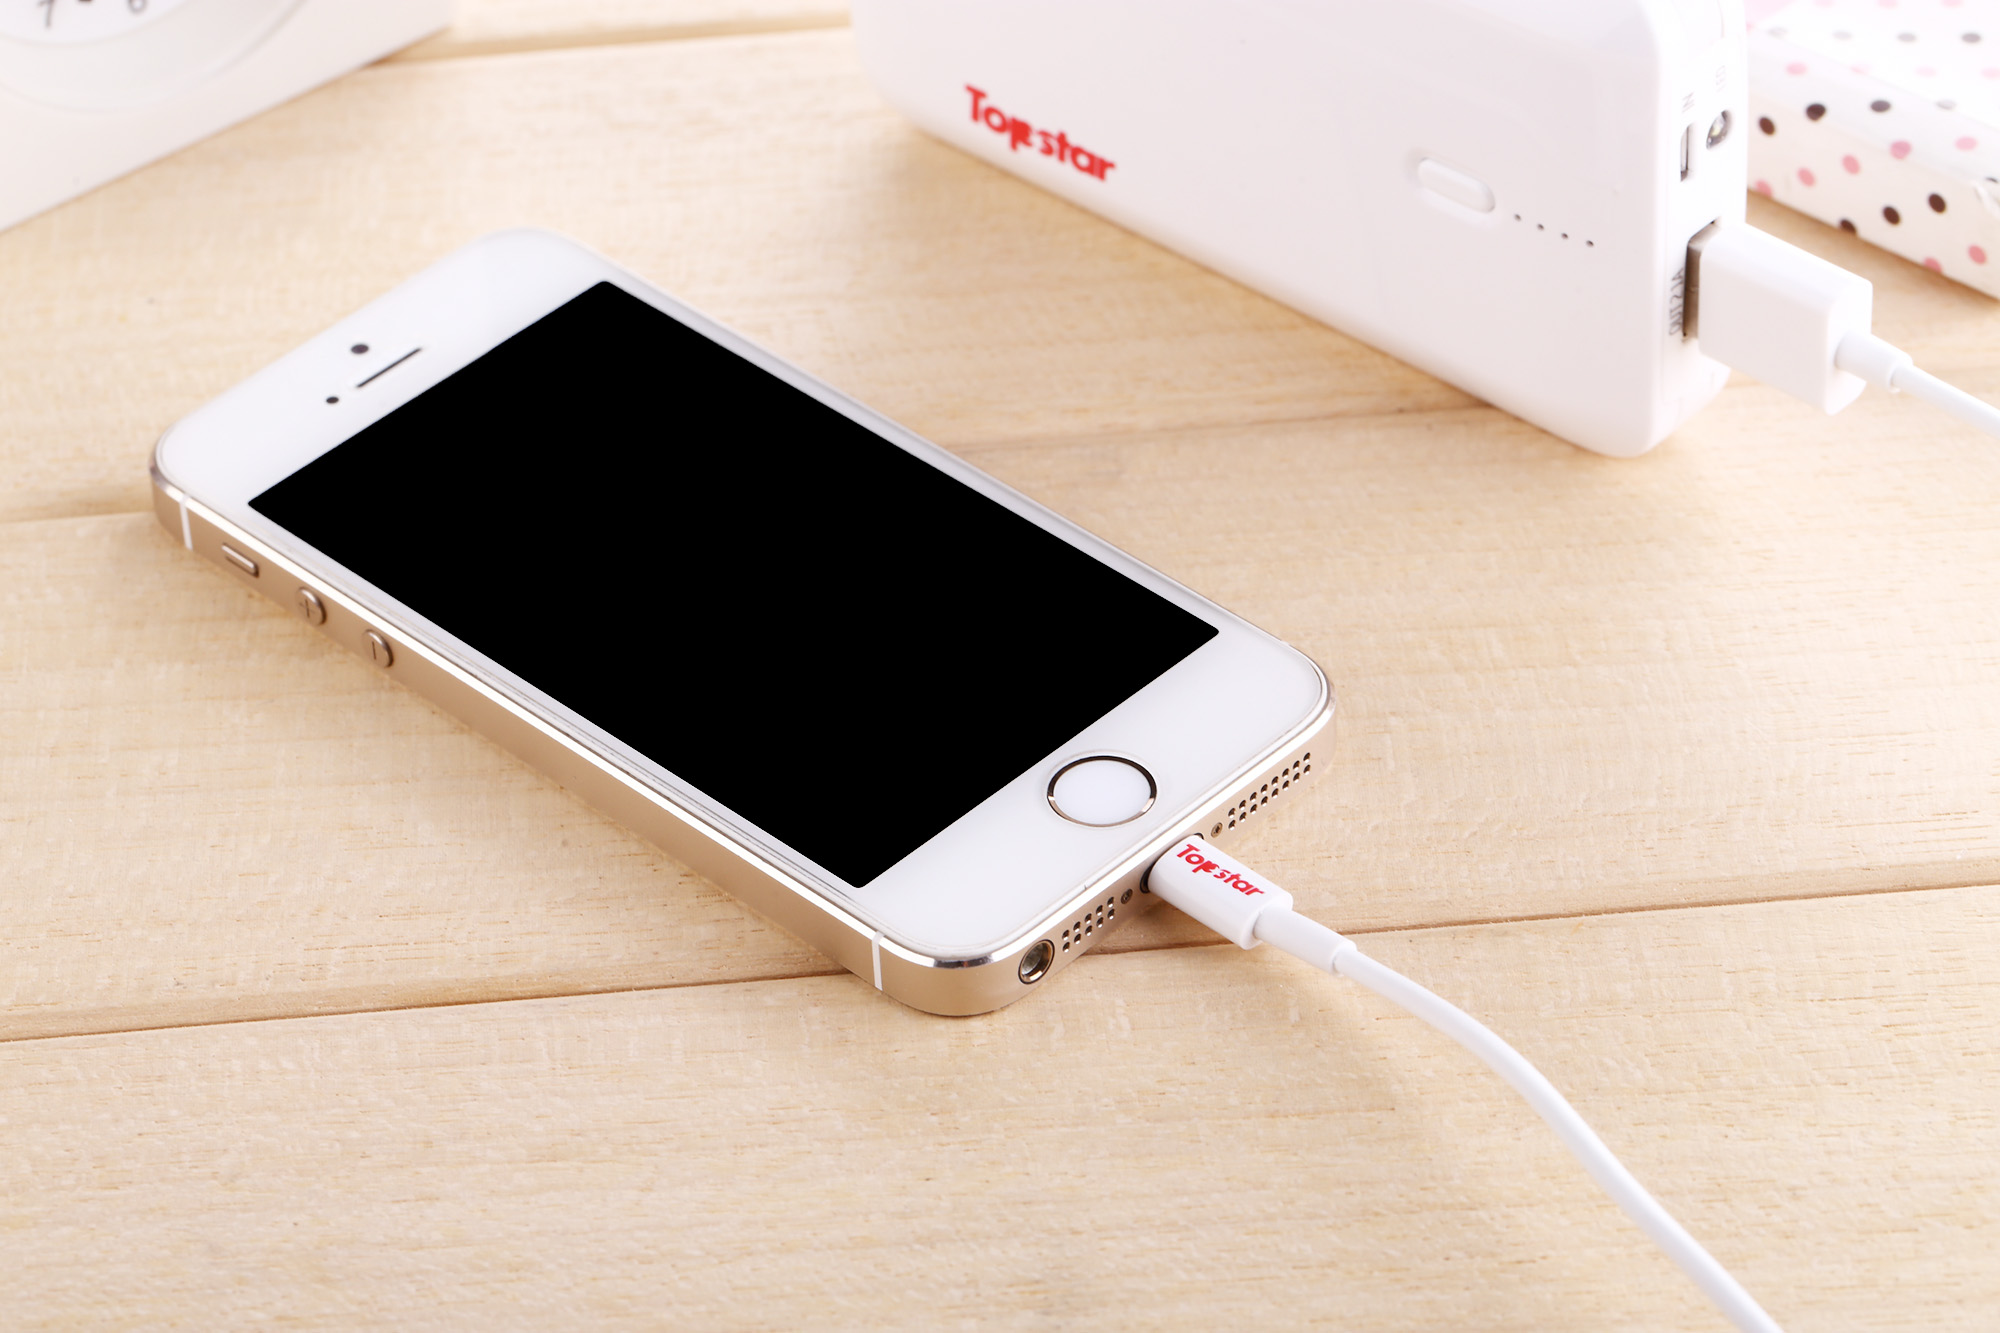 SMARTPHONE CHARGING CABLE